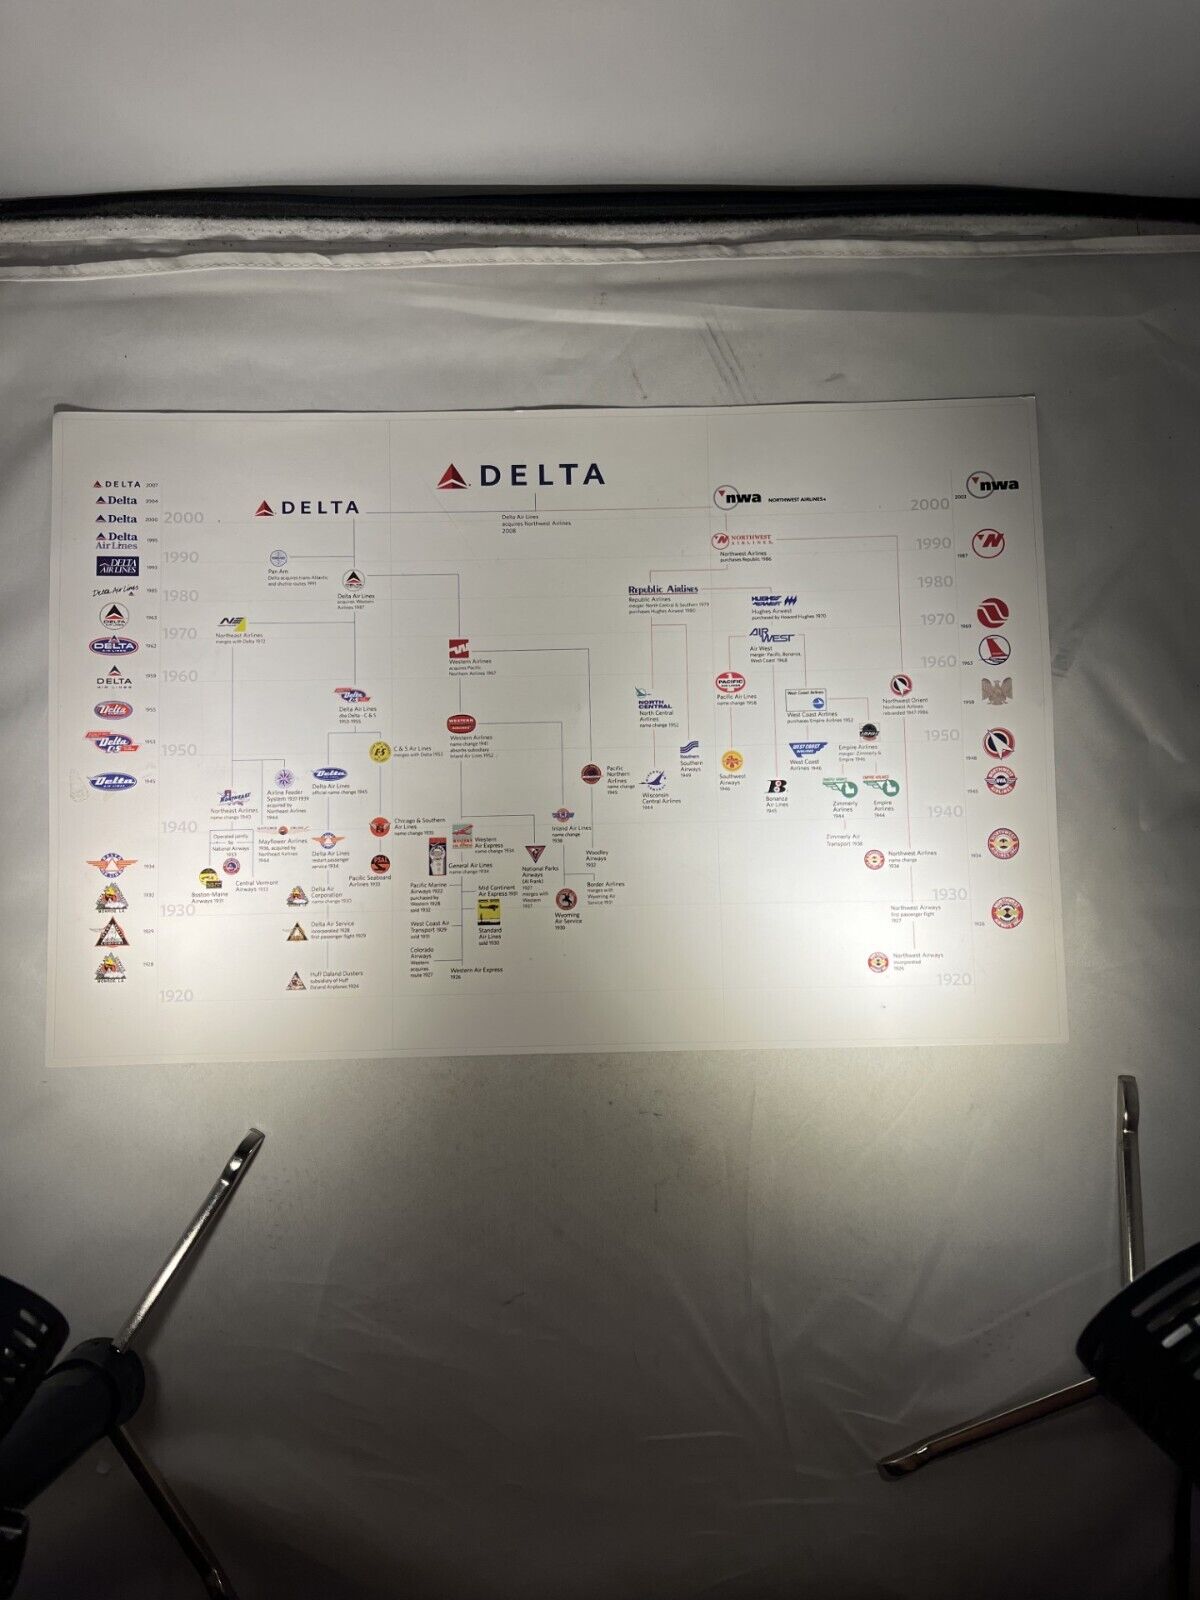 Delta Air Lines Family Tree Merger's 10th Anniver. Poster 1920-2000   17' by 11'